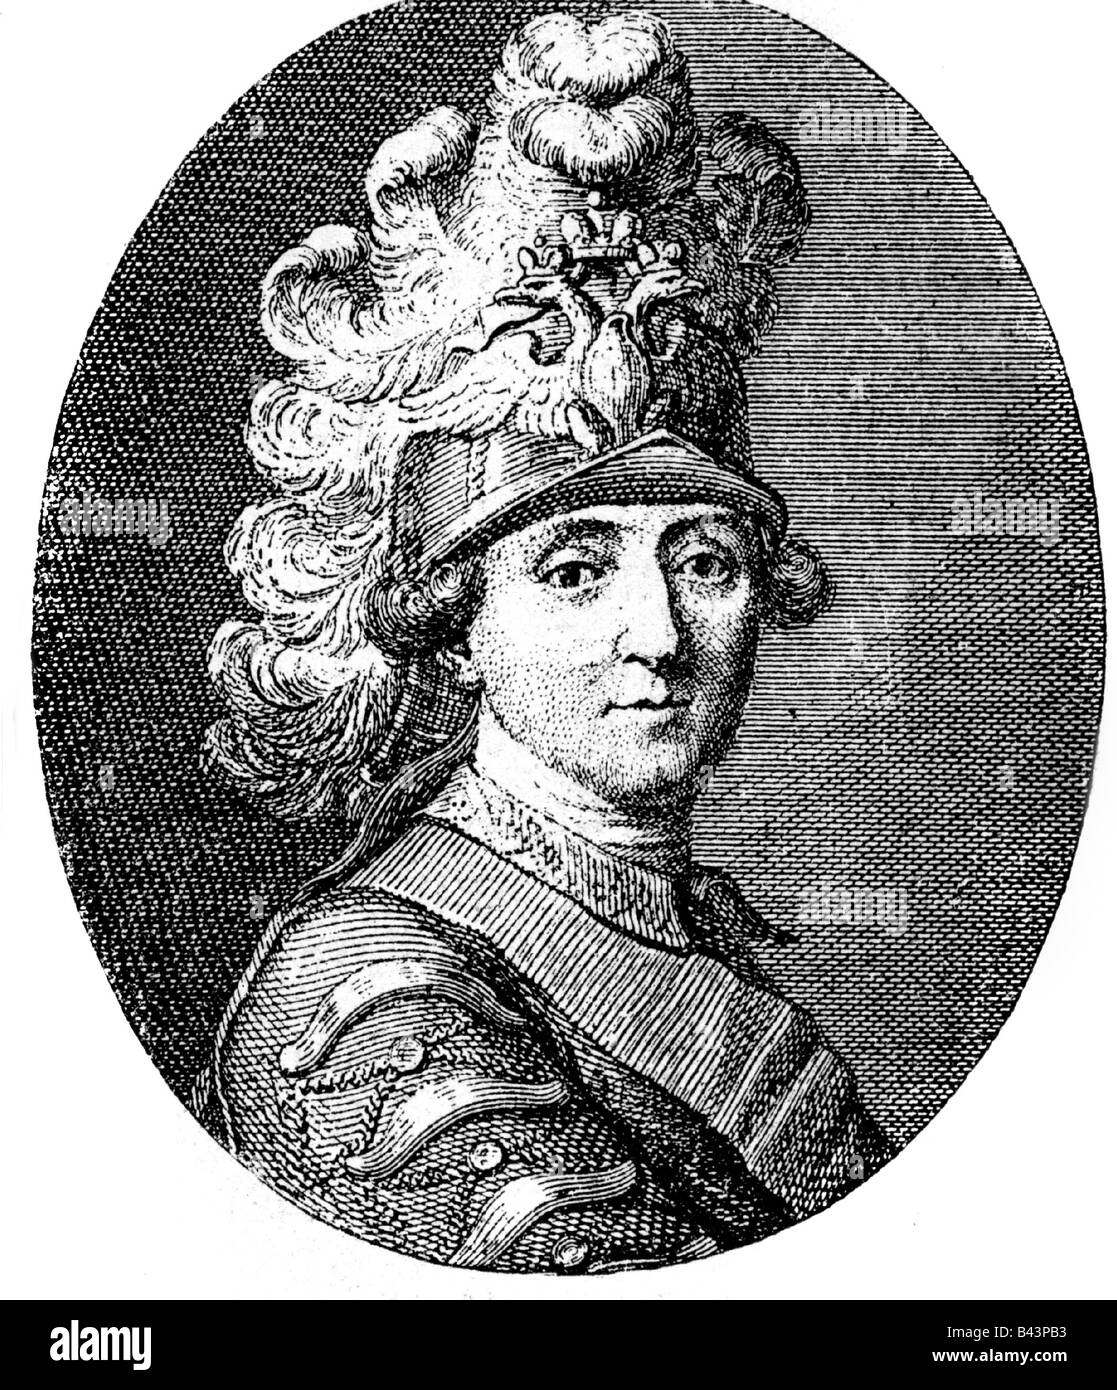 Orlov, Grigory Grigoryevich, 1737 - 5.1.1809, Russian Admiral, portrait, after contemporary engraving, 18th century, count, Russia, , Artist's Copyright has not to be cleared Stock Photo